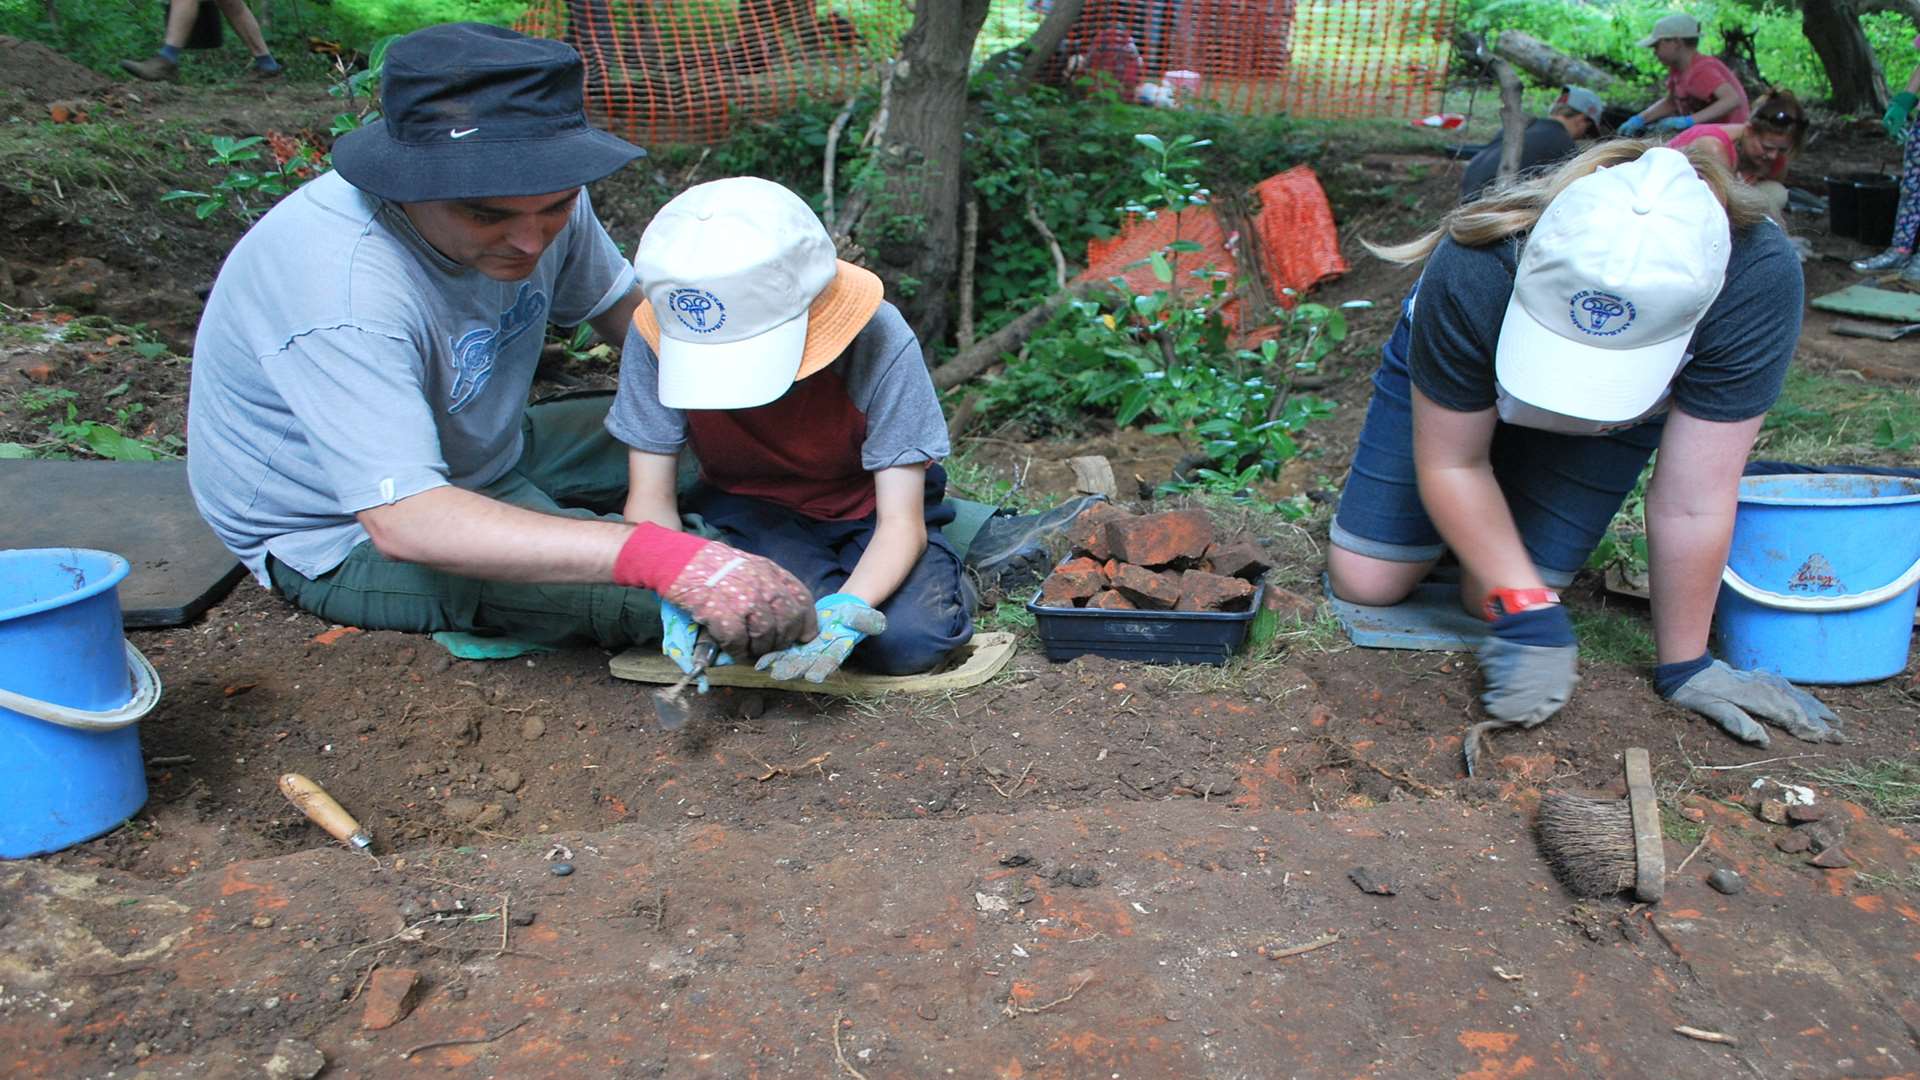 Archaeologists of all ages have been digging in Cobham Wood. Picture: Andrew Mayfield